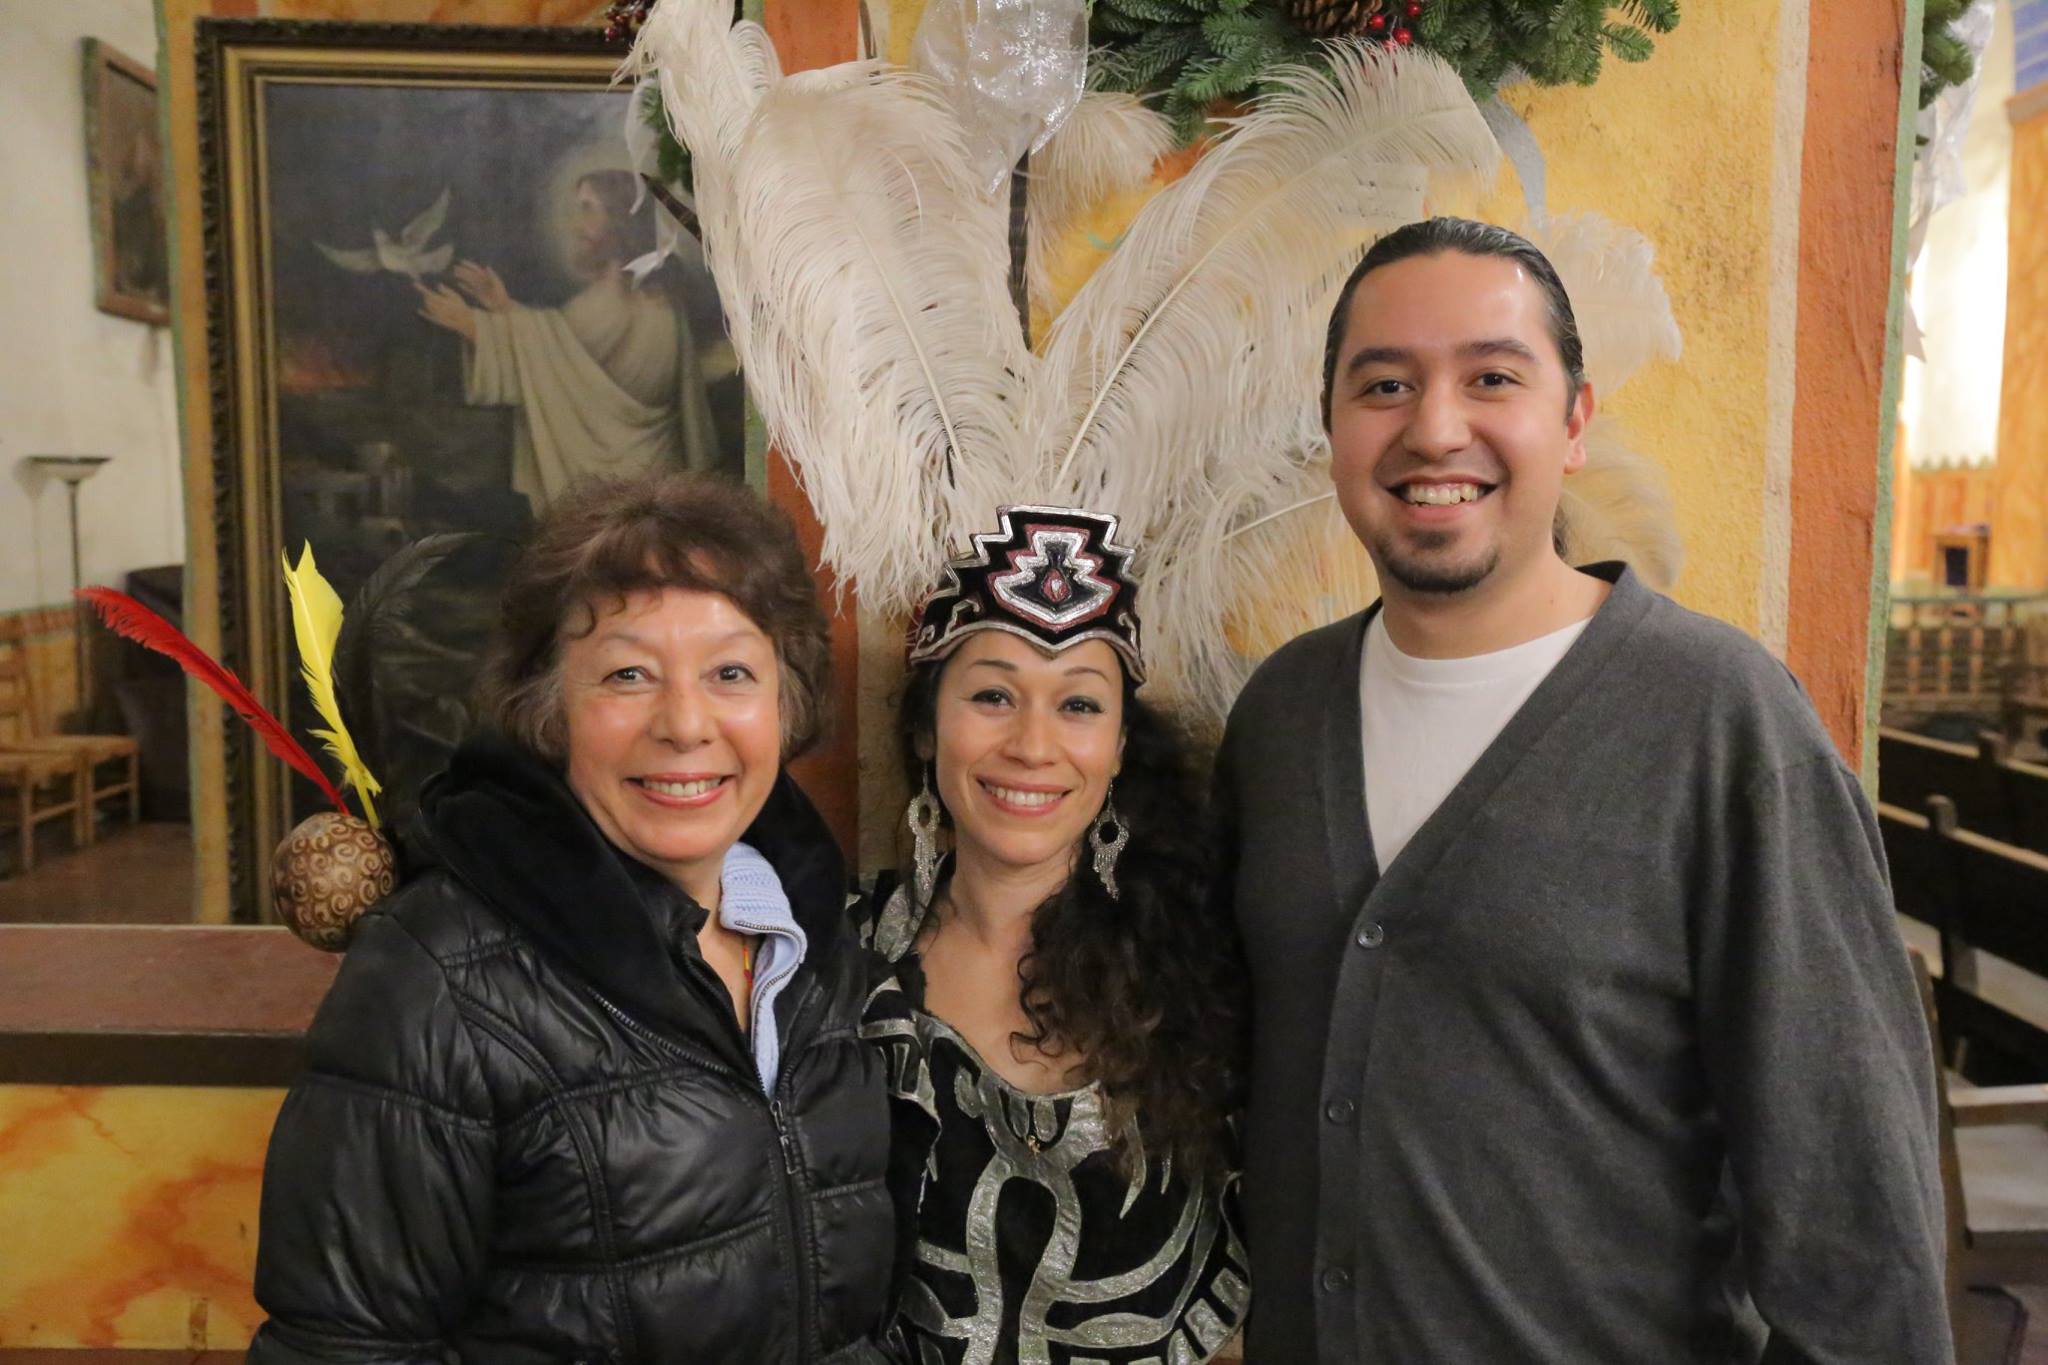 Marisol Duarte poses with her mother, Juanita Vargas, and younger brother, Ernesto Vasquez, after performing in an El Teatro Campesino production of La Virgen Del Tepeyac at the Mission in San Juan Bautista.